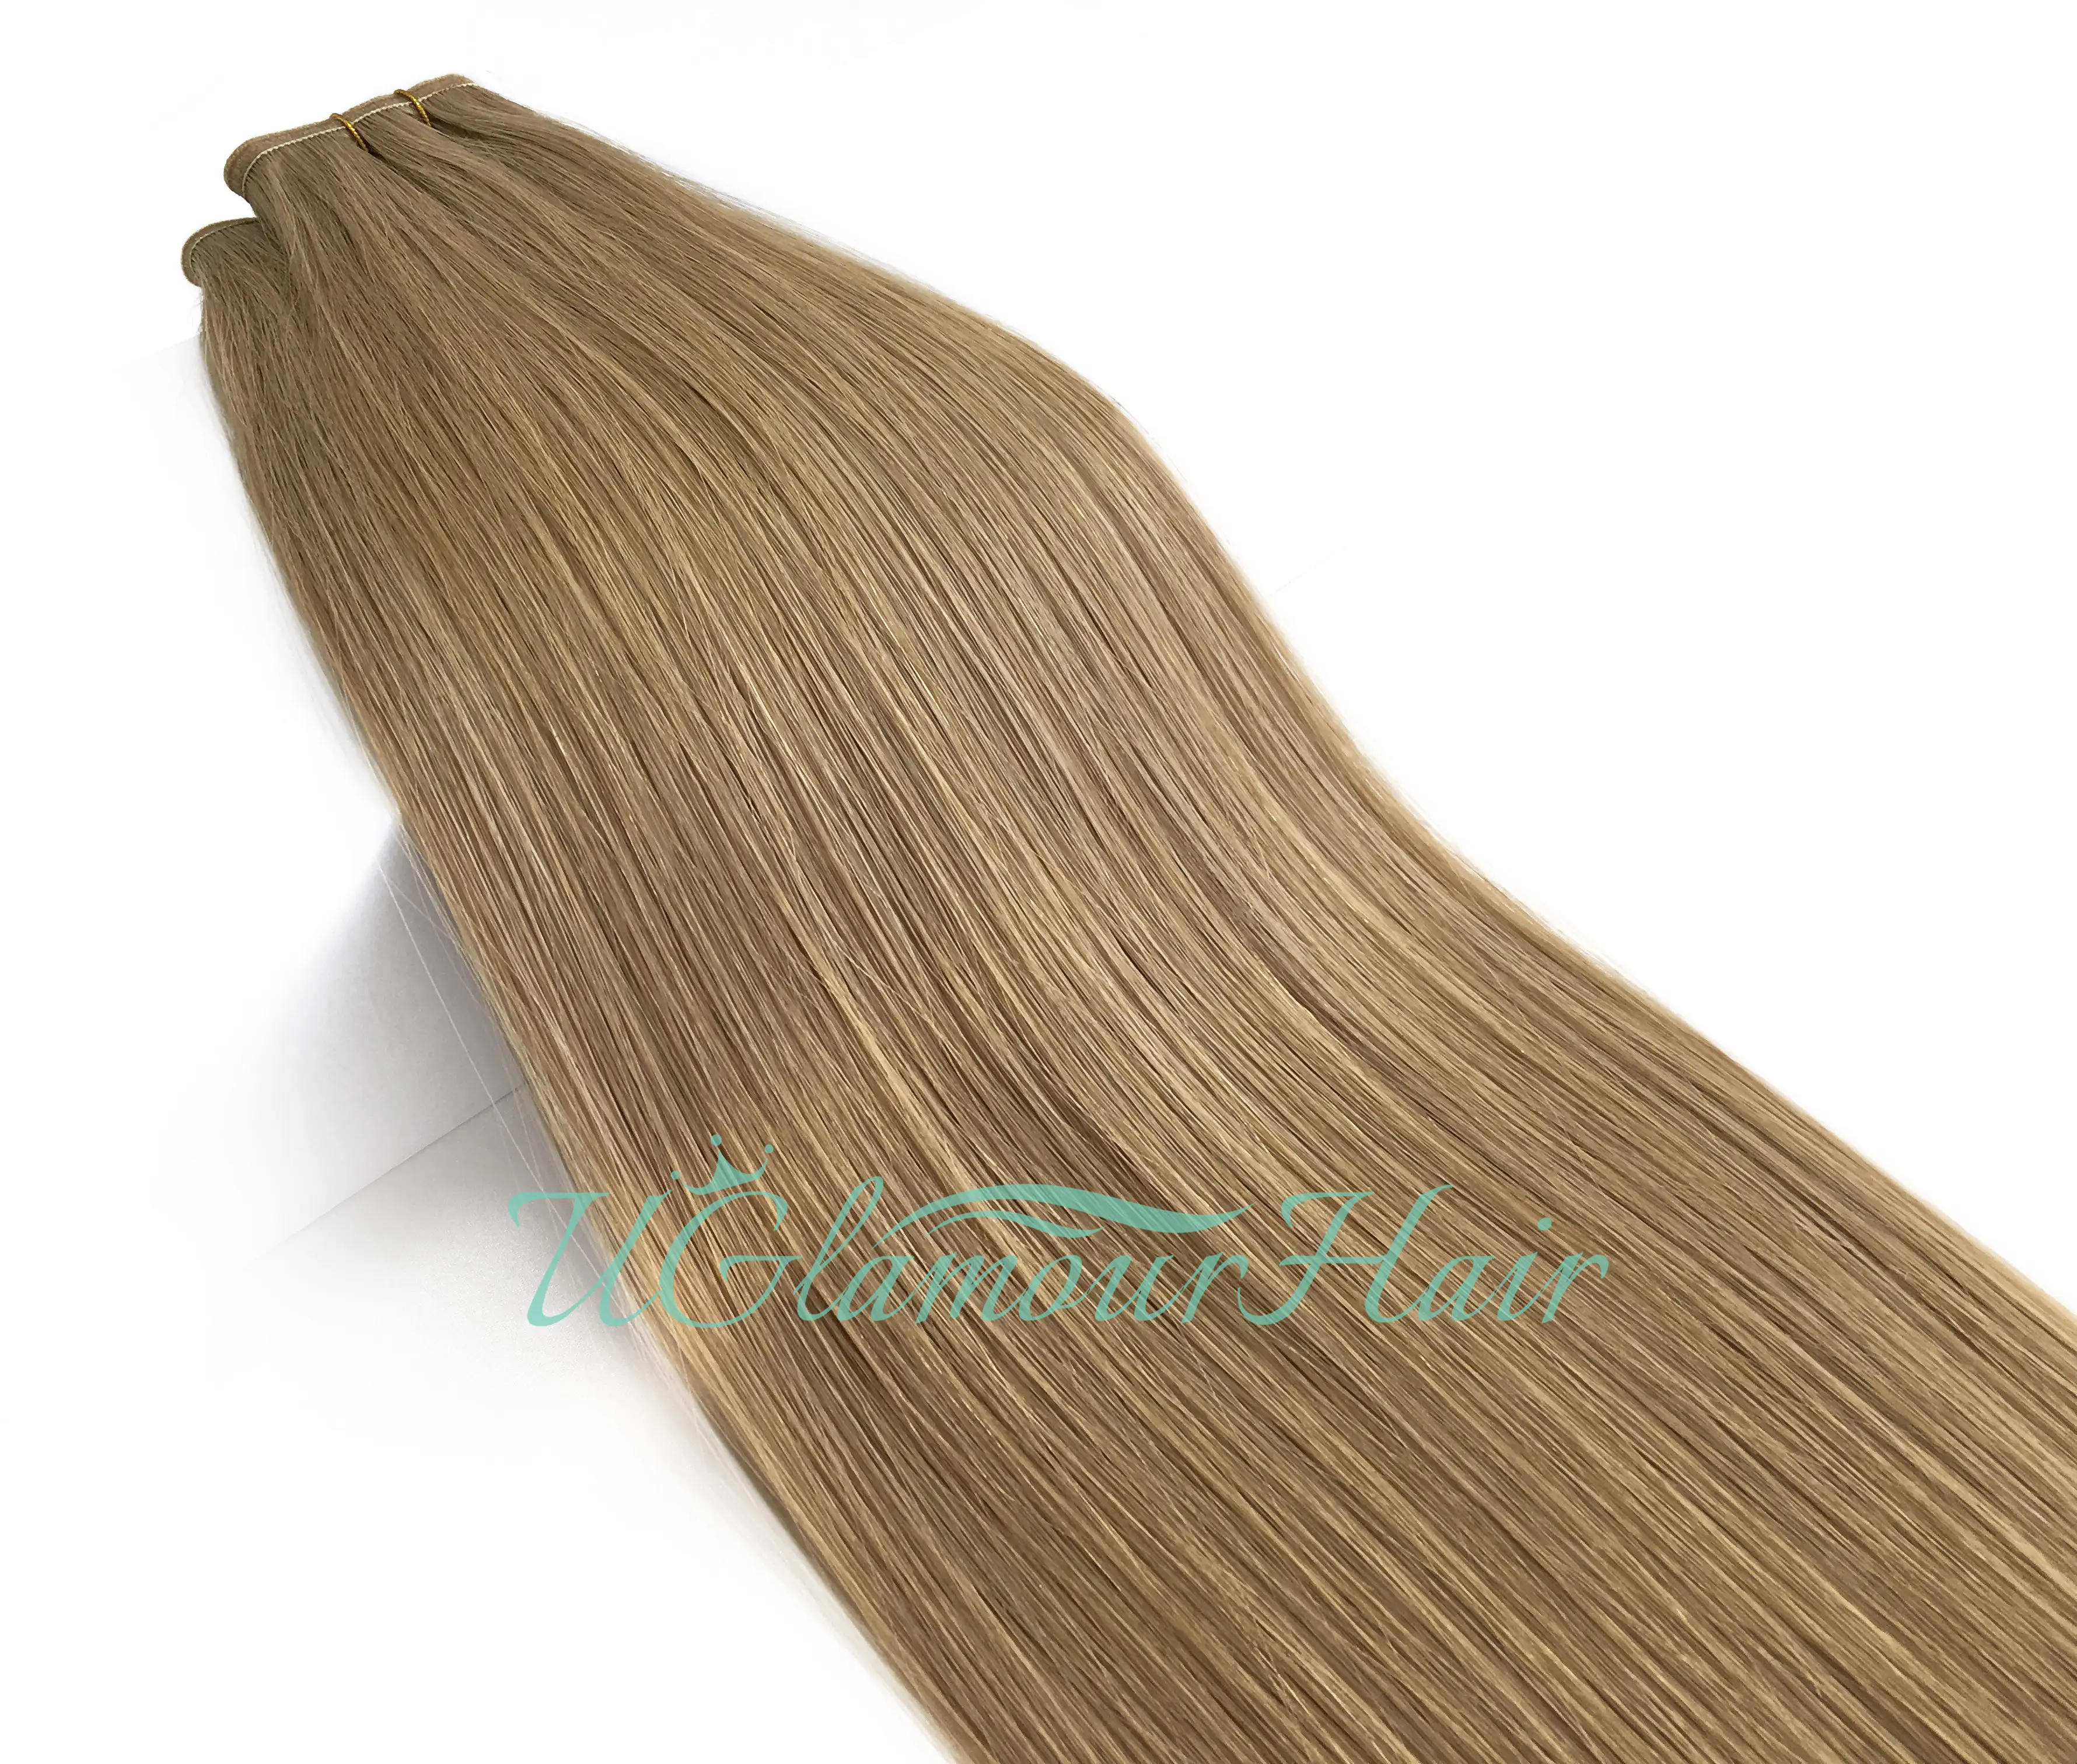 Thick end hair pack factory outset new product wholesale flat ribbon weft